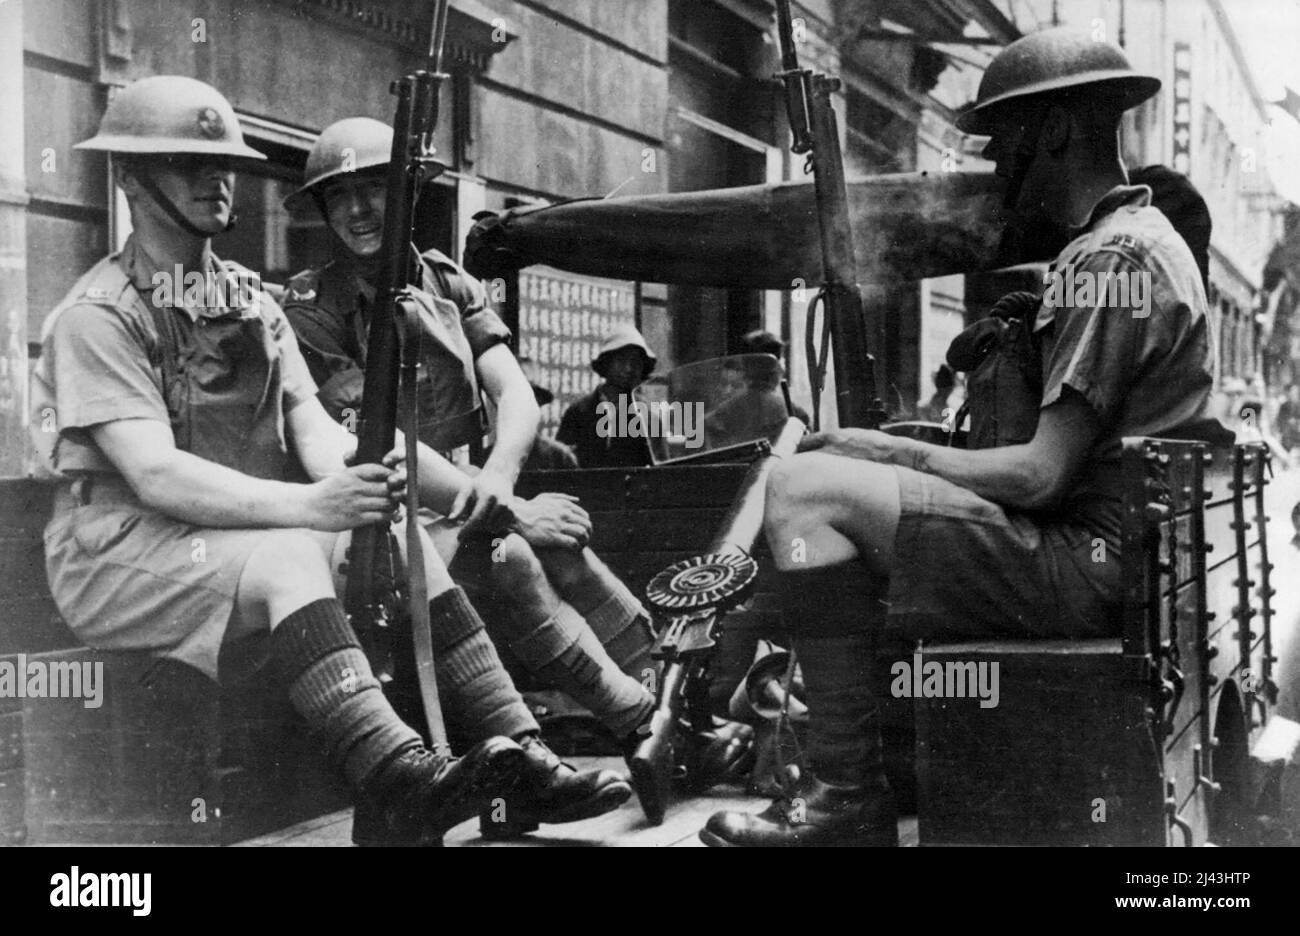 British Tommies In Shanghai Streets Again -- British Tommies with rifles and Bayonets in Shanghai street, ready for trouble should it arise. Early in May when Japanese troops Invaded the Shanghai International settlement again because of a bomb thrown on the nanking road British troops were again called to keep order. After lengthy negotiations between the Japanese and the settlement authorities, the Japanese withdrew. June 7, 1938. (Photo by Associated Press Photo). Stock Photo